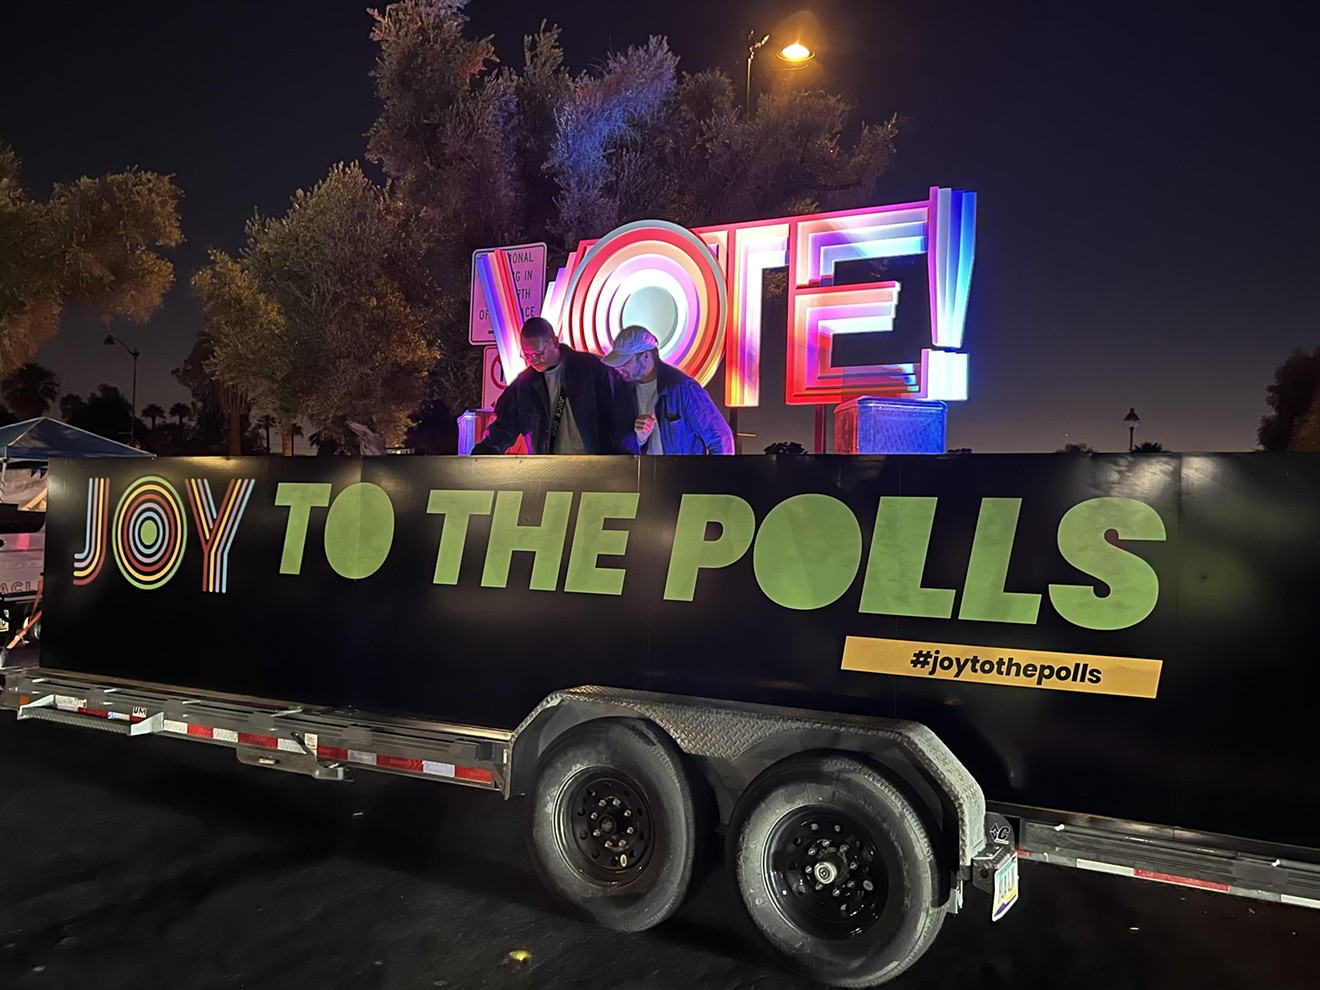 On their final stop of the night, the DJs of Joy to the Polls gave folks waiting in line to vote at Mesa Convention Center a little musical relief.